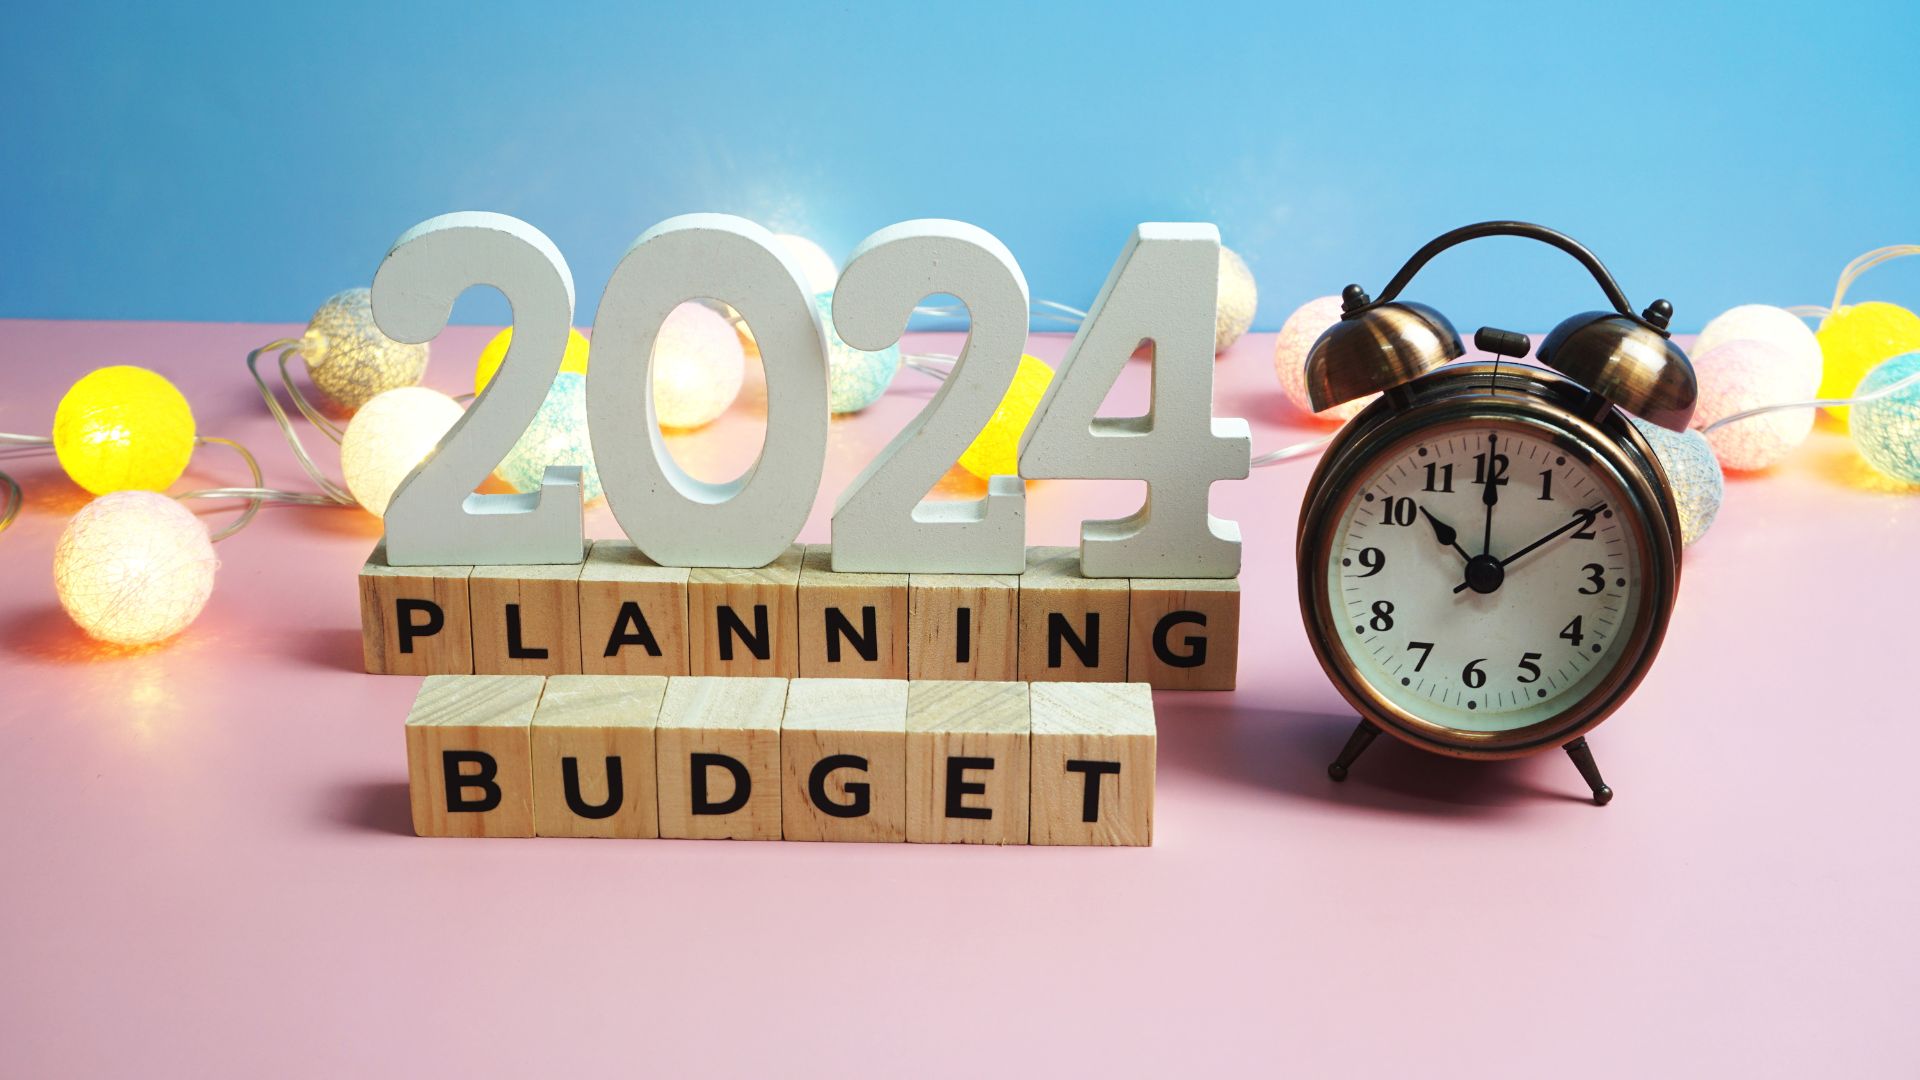 2024 Budget Planning alphabet letters on blue and pink background 1920x1080 HD Desktop wallpaper